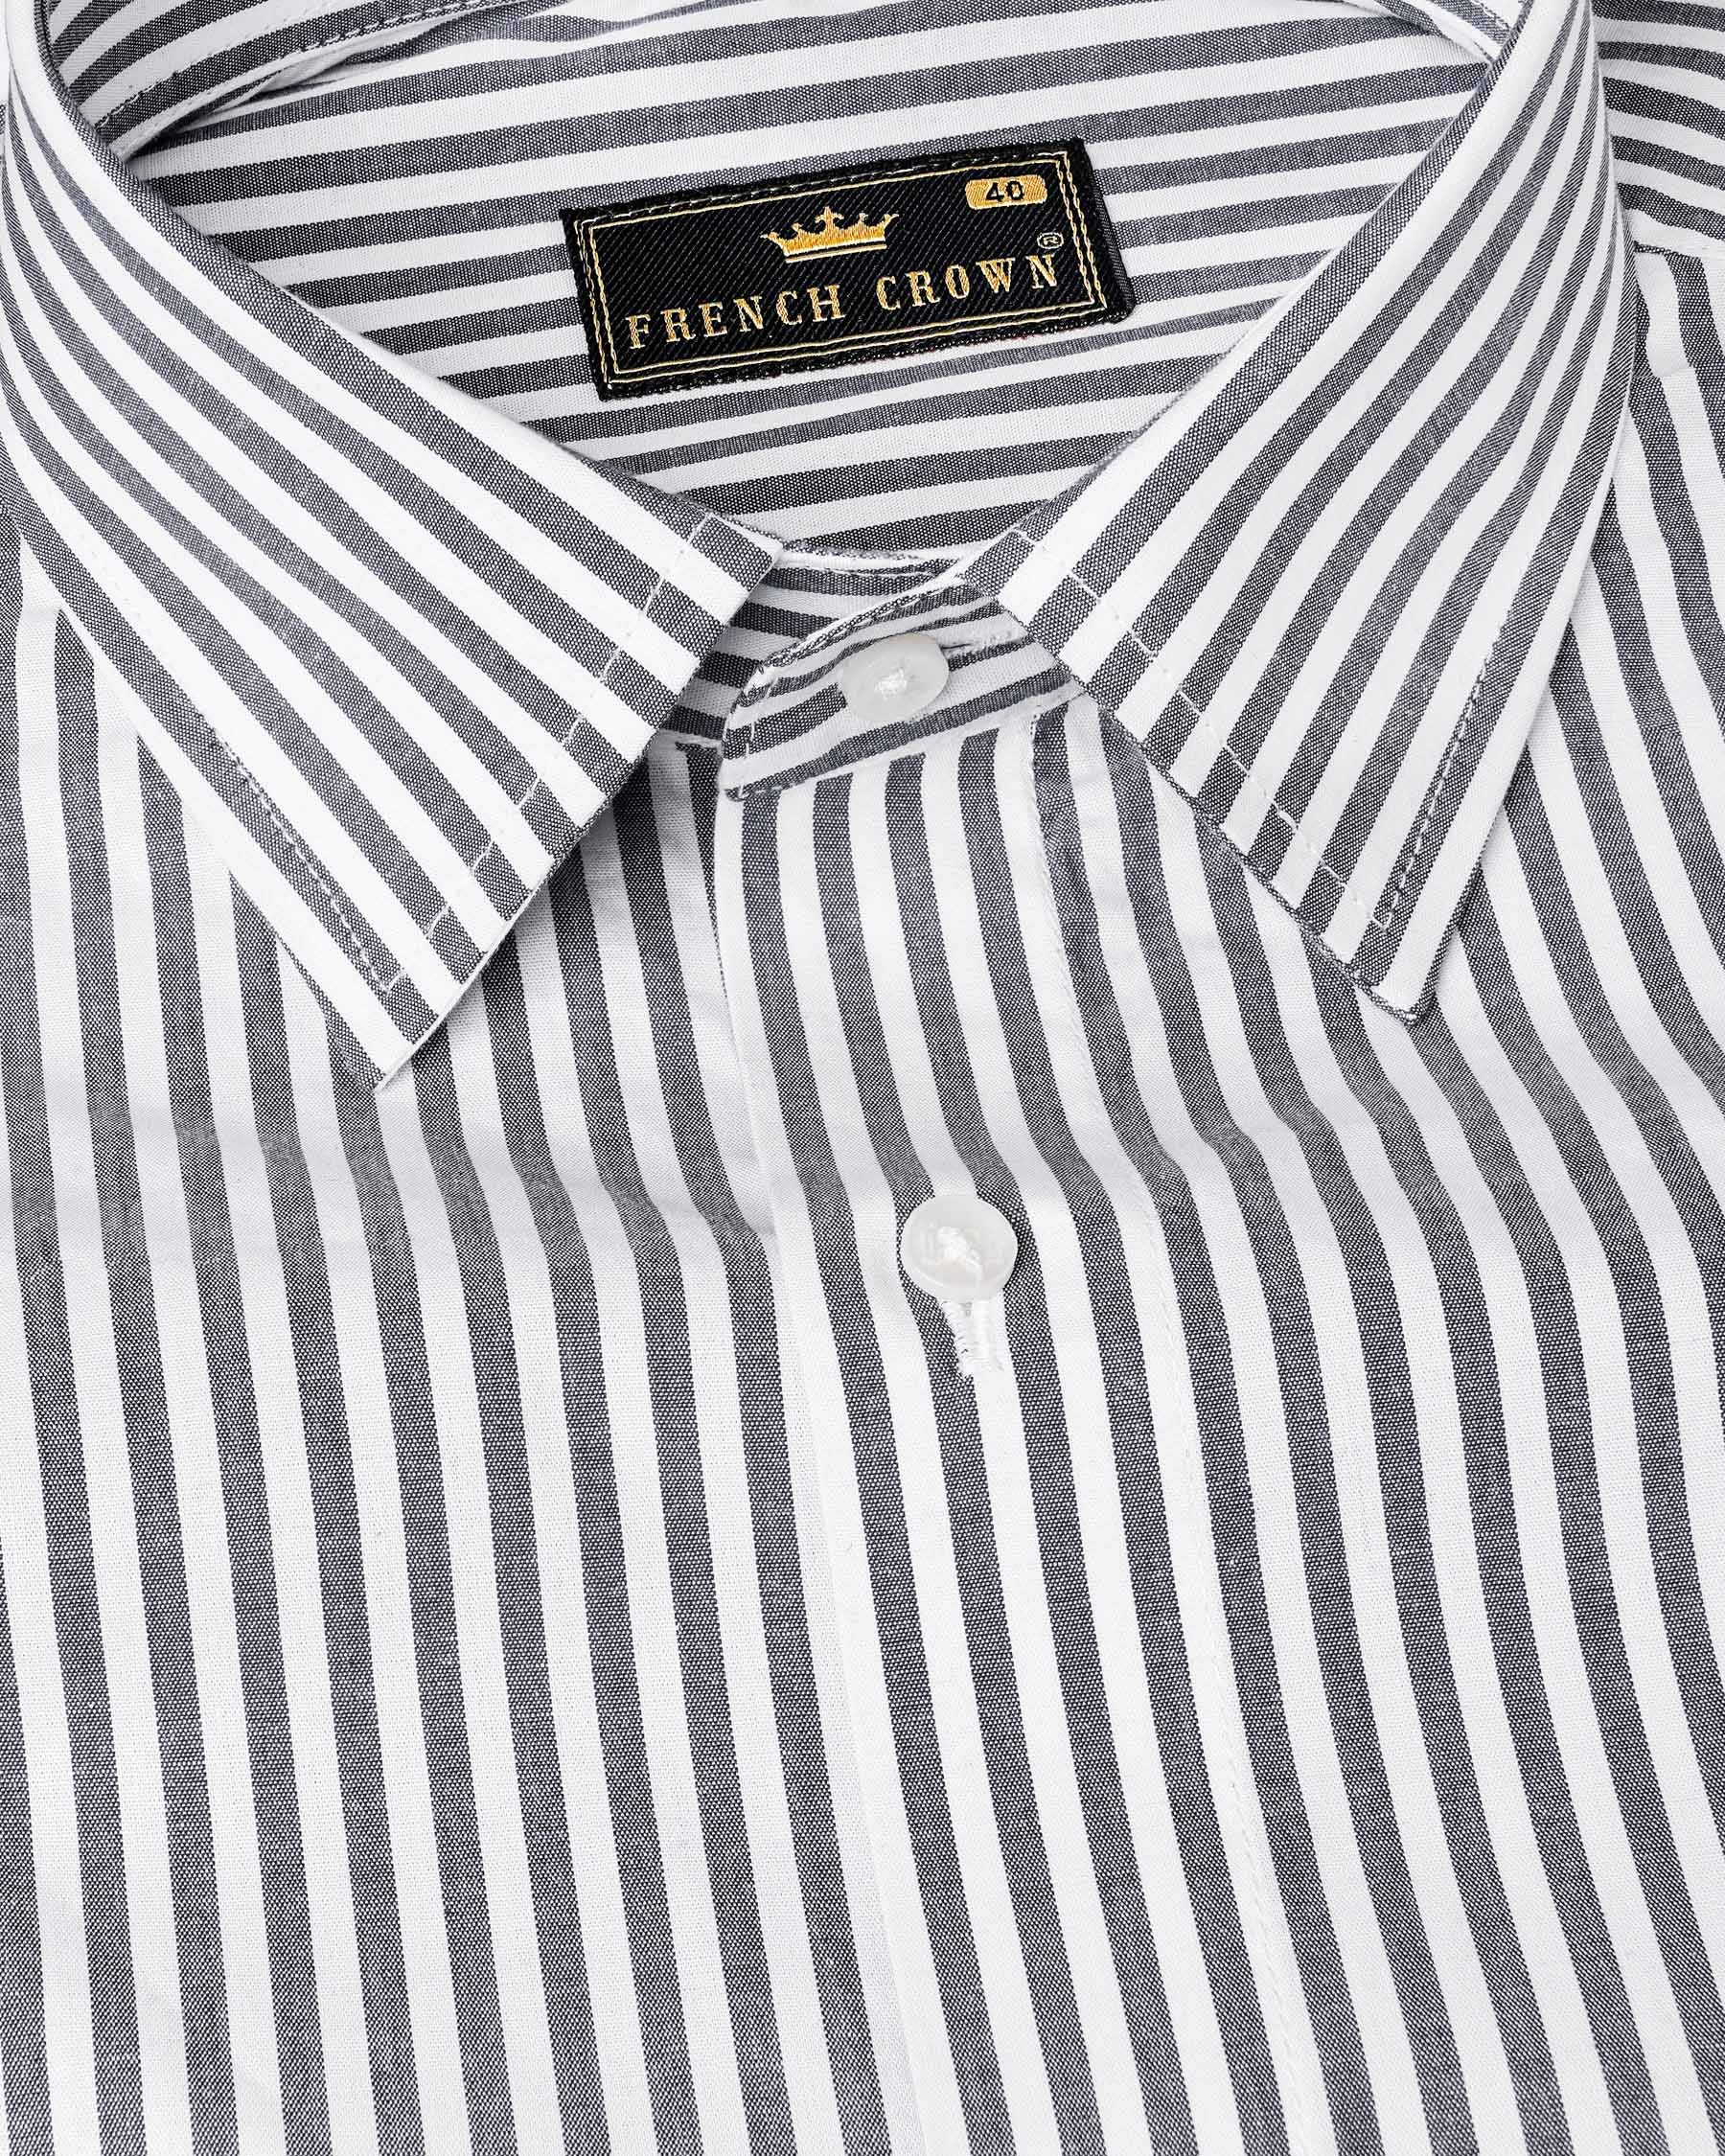 Dolphin Gray and White Striped Premium Cotton Shirt 7966-38, 7966-H-38, 7966-39, 7966-H-39, 7966-40, 7966-H-40, 7966-42, 7966-H-42, 7966-44, 7966-H-44, 7966-46, 7966-H-46, 7966-48, 7966-H-48, 7966-50, 7966-H-50, 7966-52, 7966-H-52